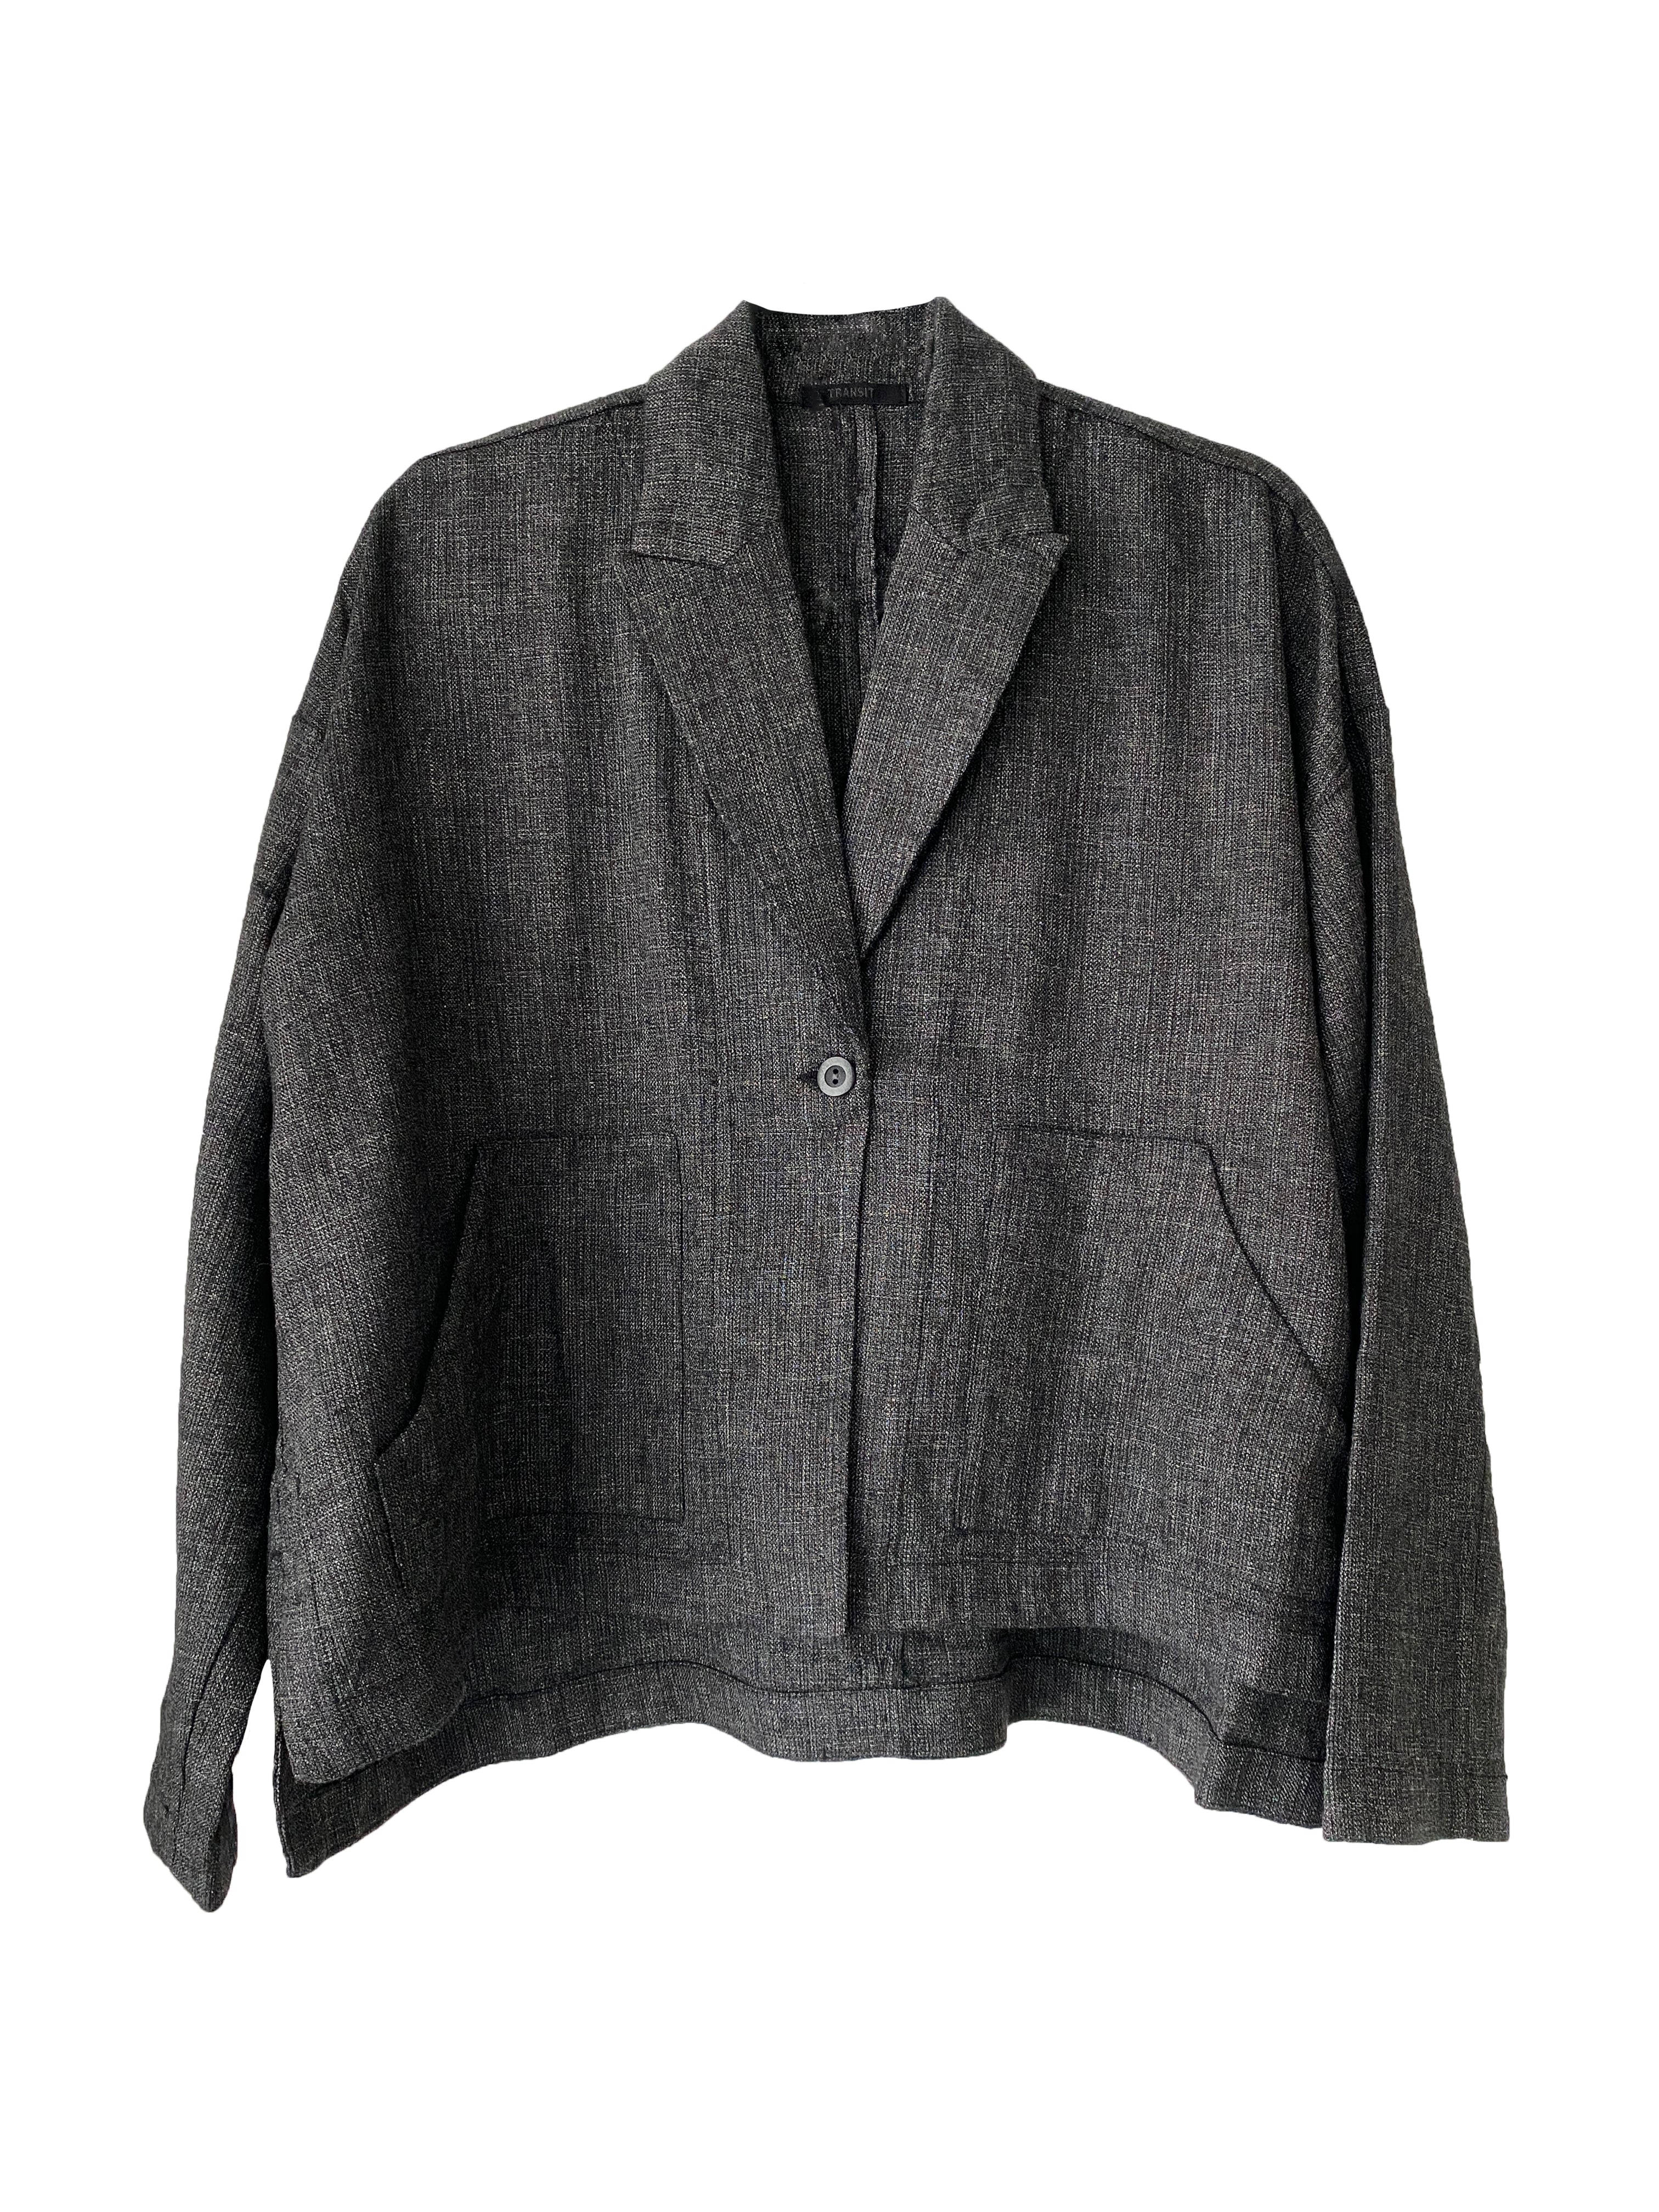 RELAXED JACKET CHARCOAL